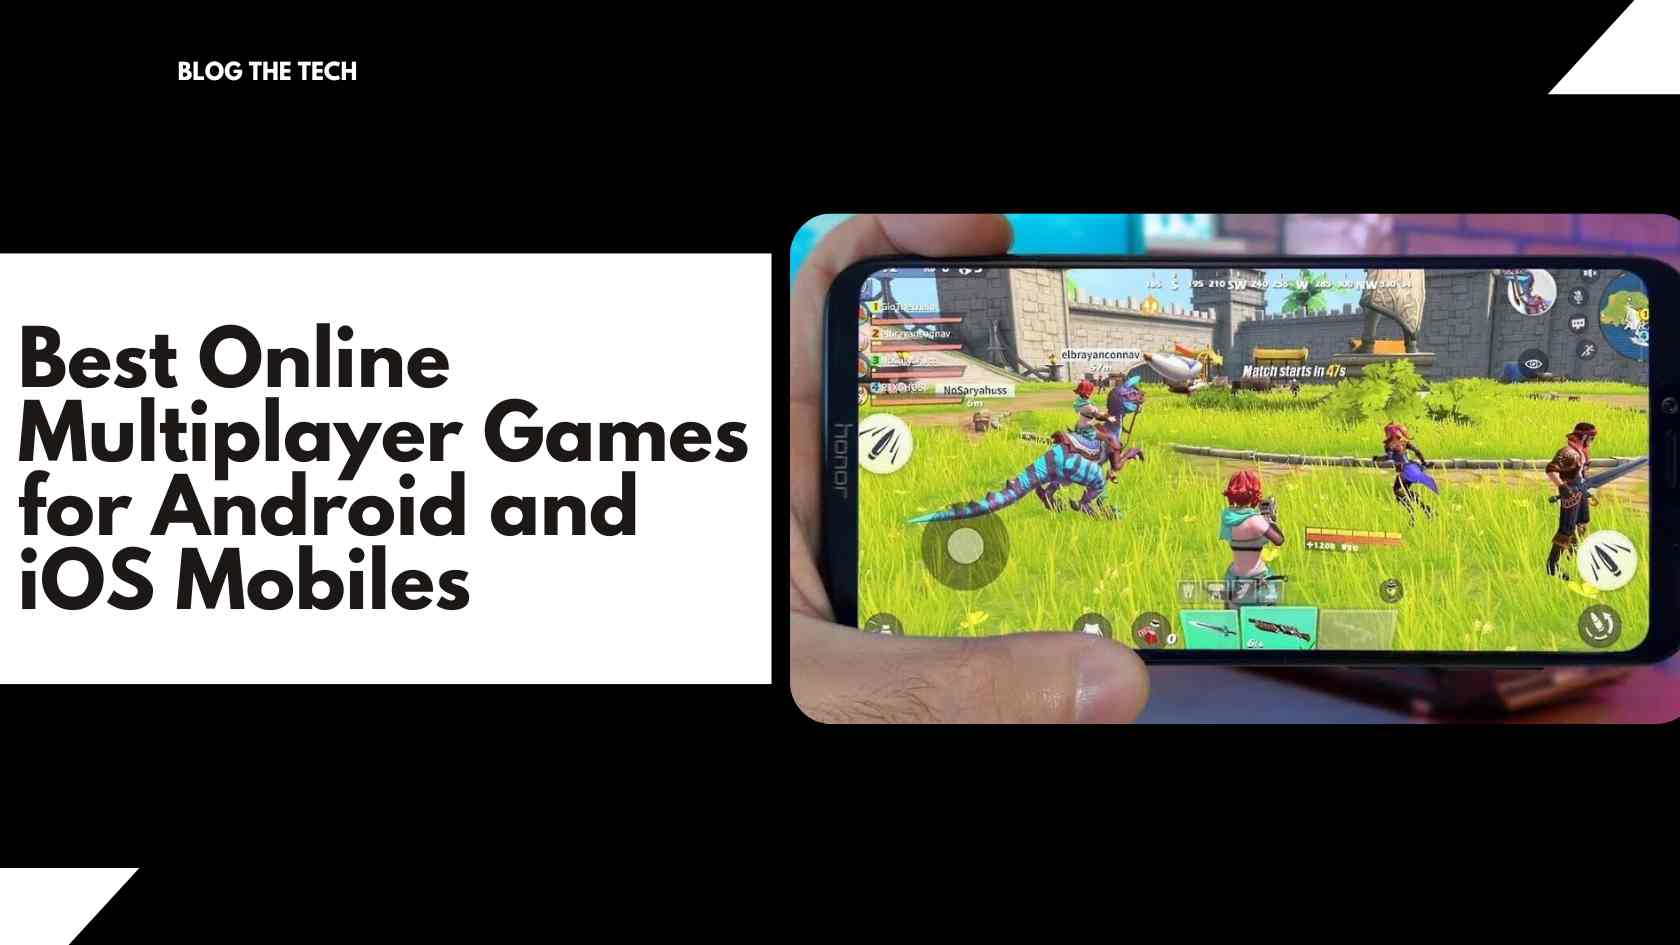 Best Online Multiplayer Games for Android and iOS Mobiles